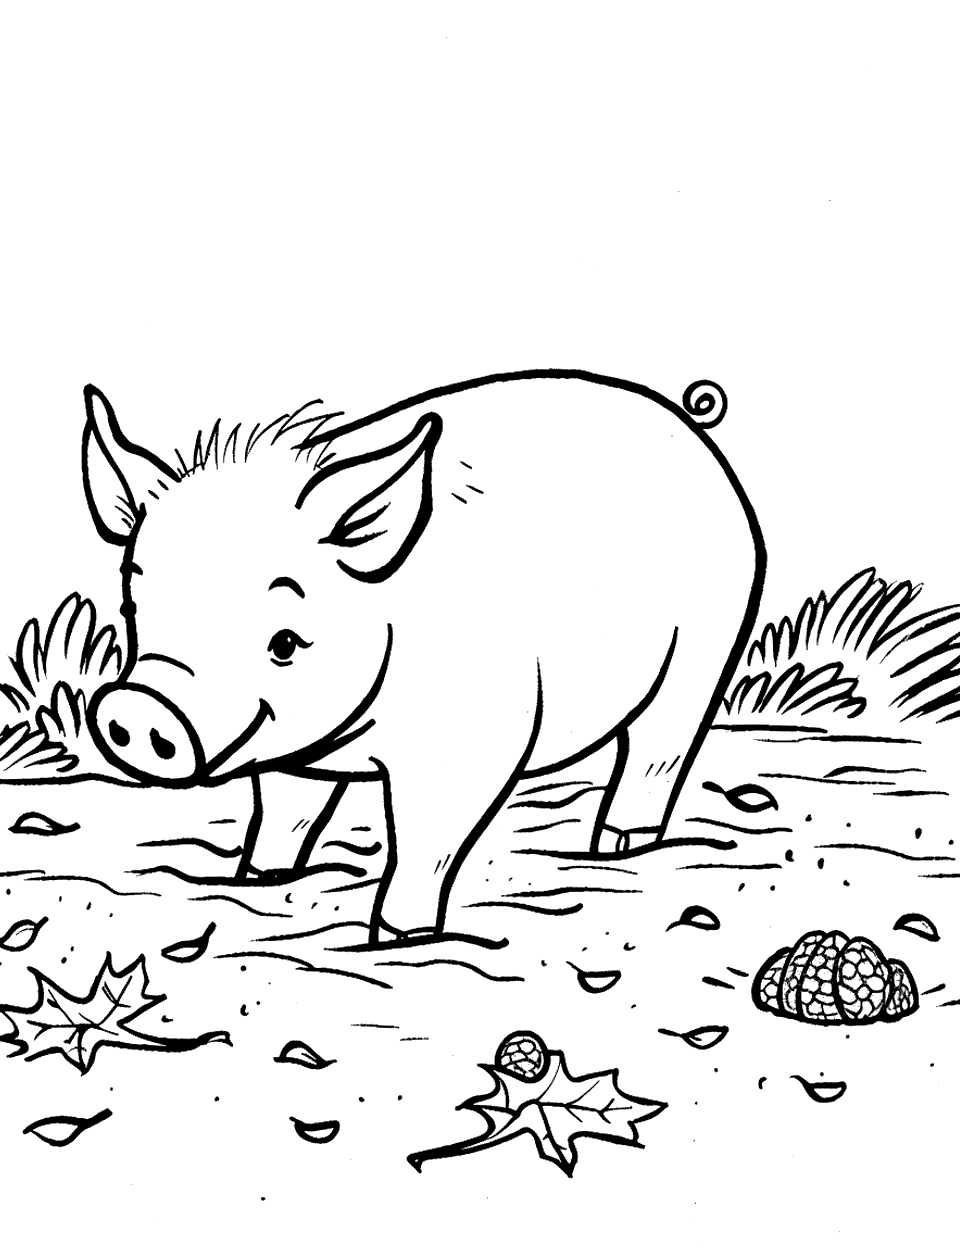 Pig Snouting for Truffles Farm Animal Coloring Page - A pig in the dirt, searching for truffles among a few fallen leaves.